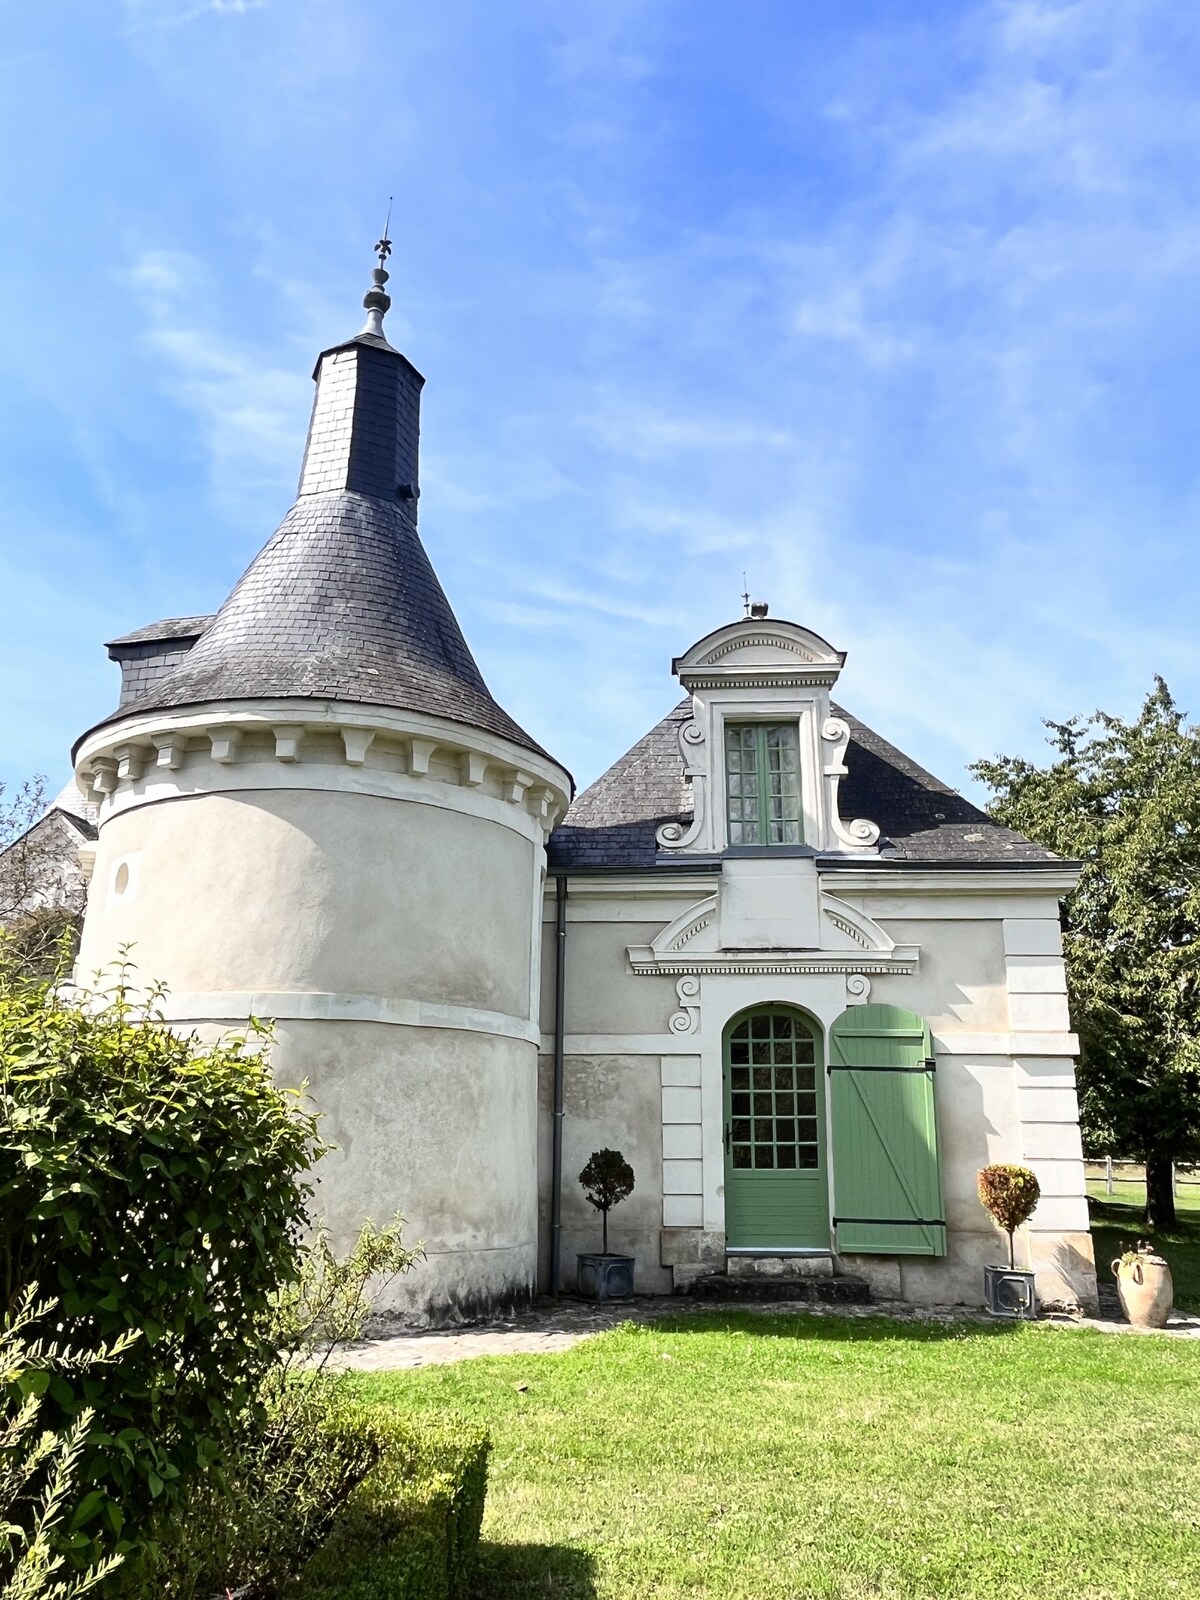 Guest house in a 17th century property